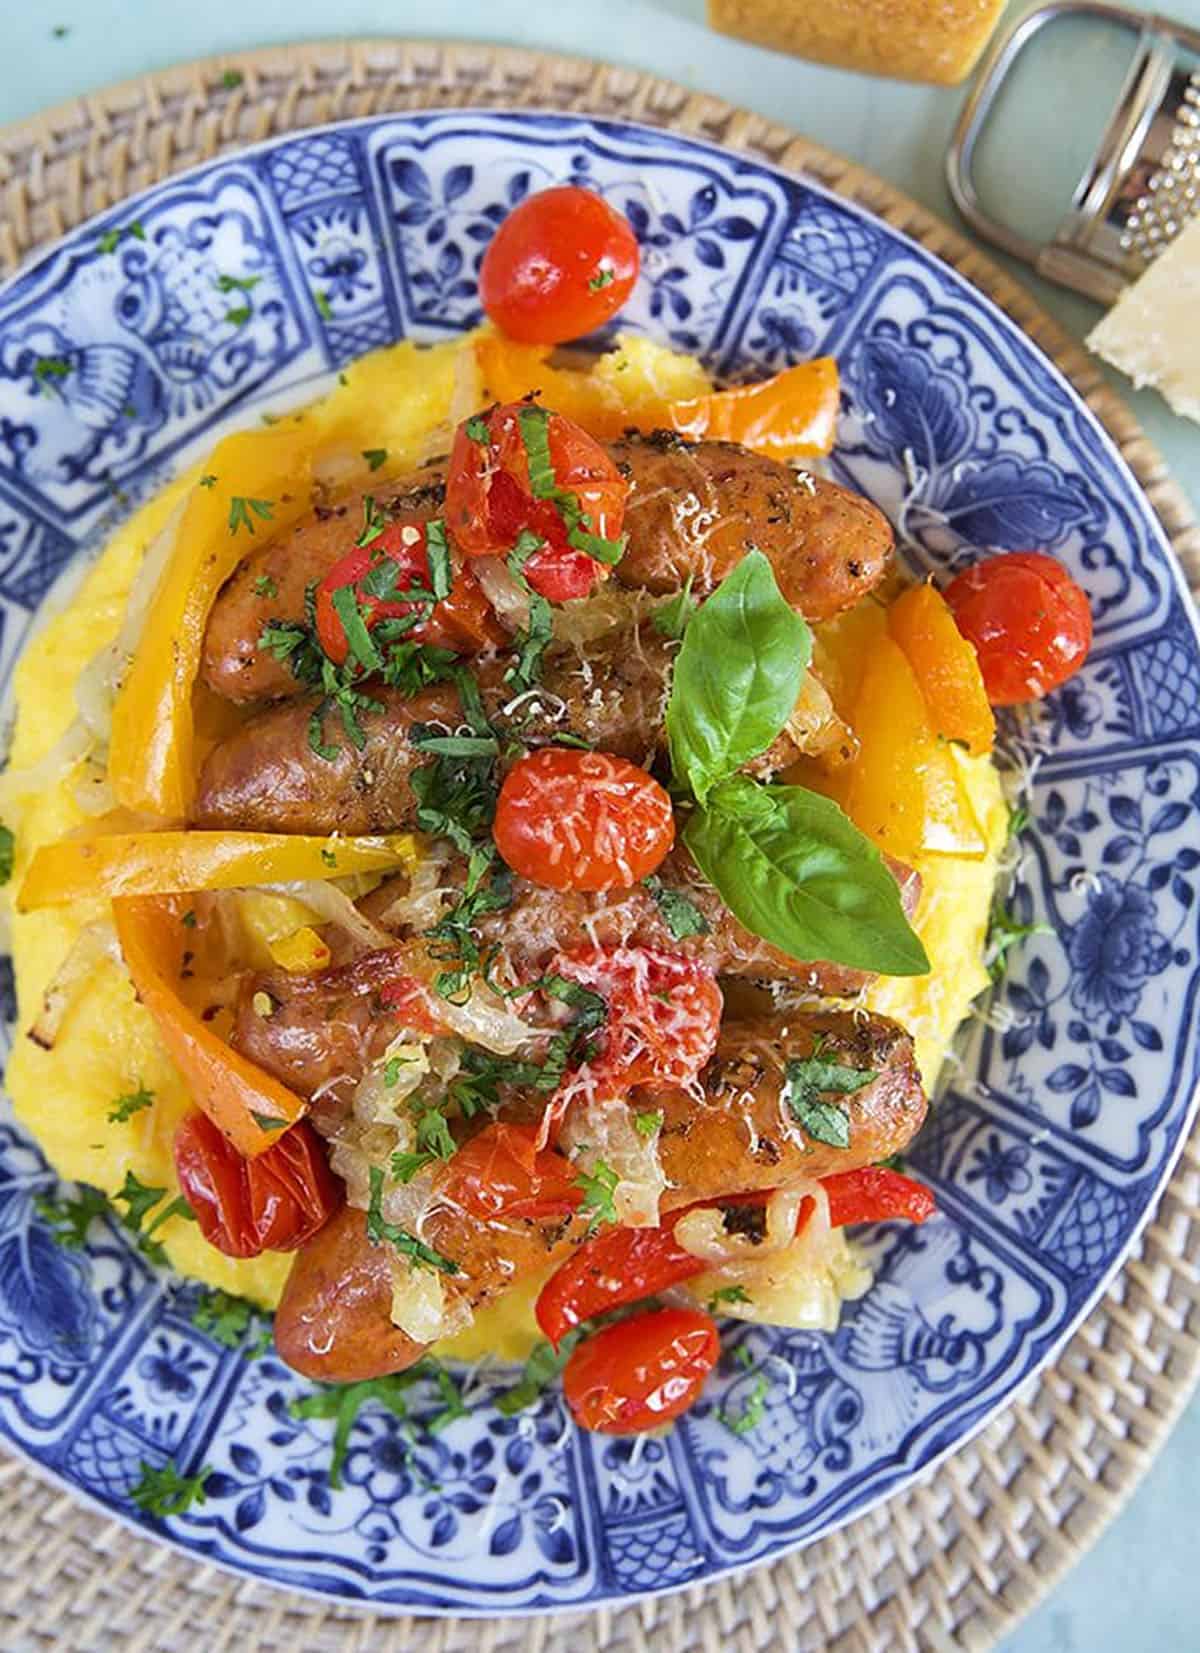 Two links of italian sausage and peppers with onions on a bed of polenta on a blue and white plate.